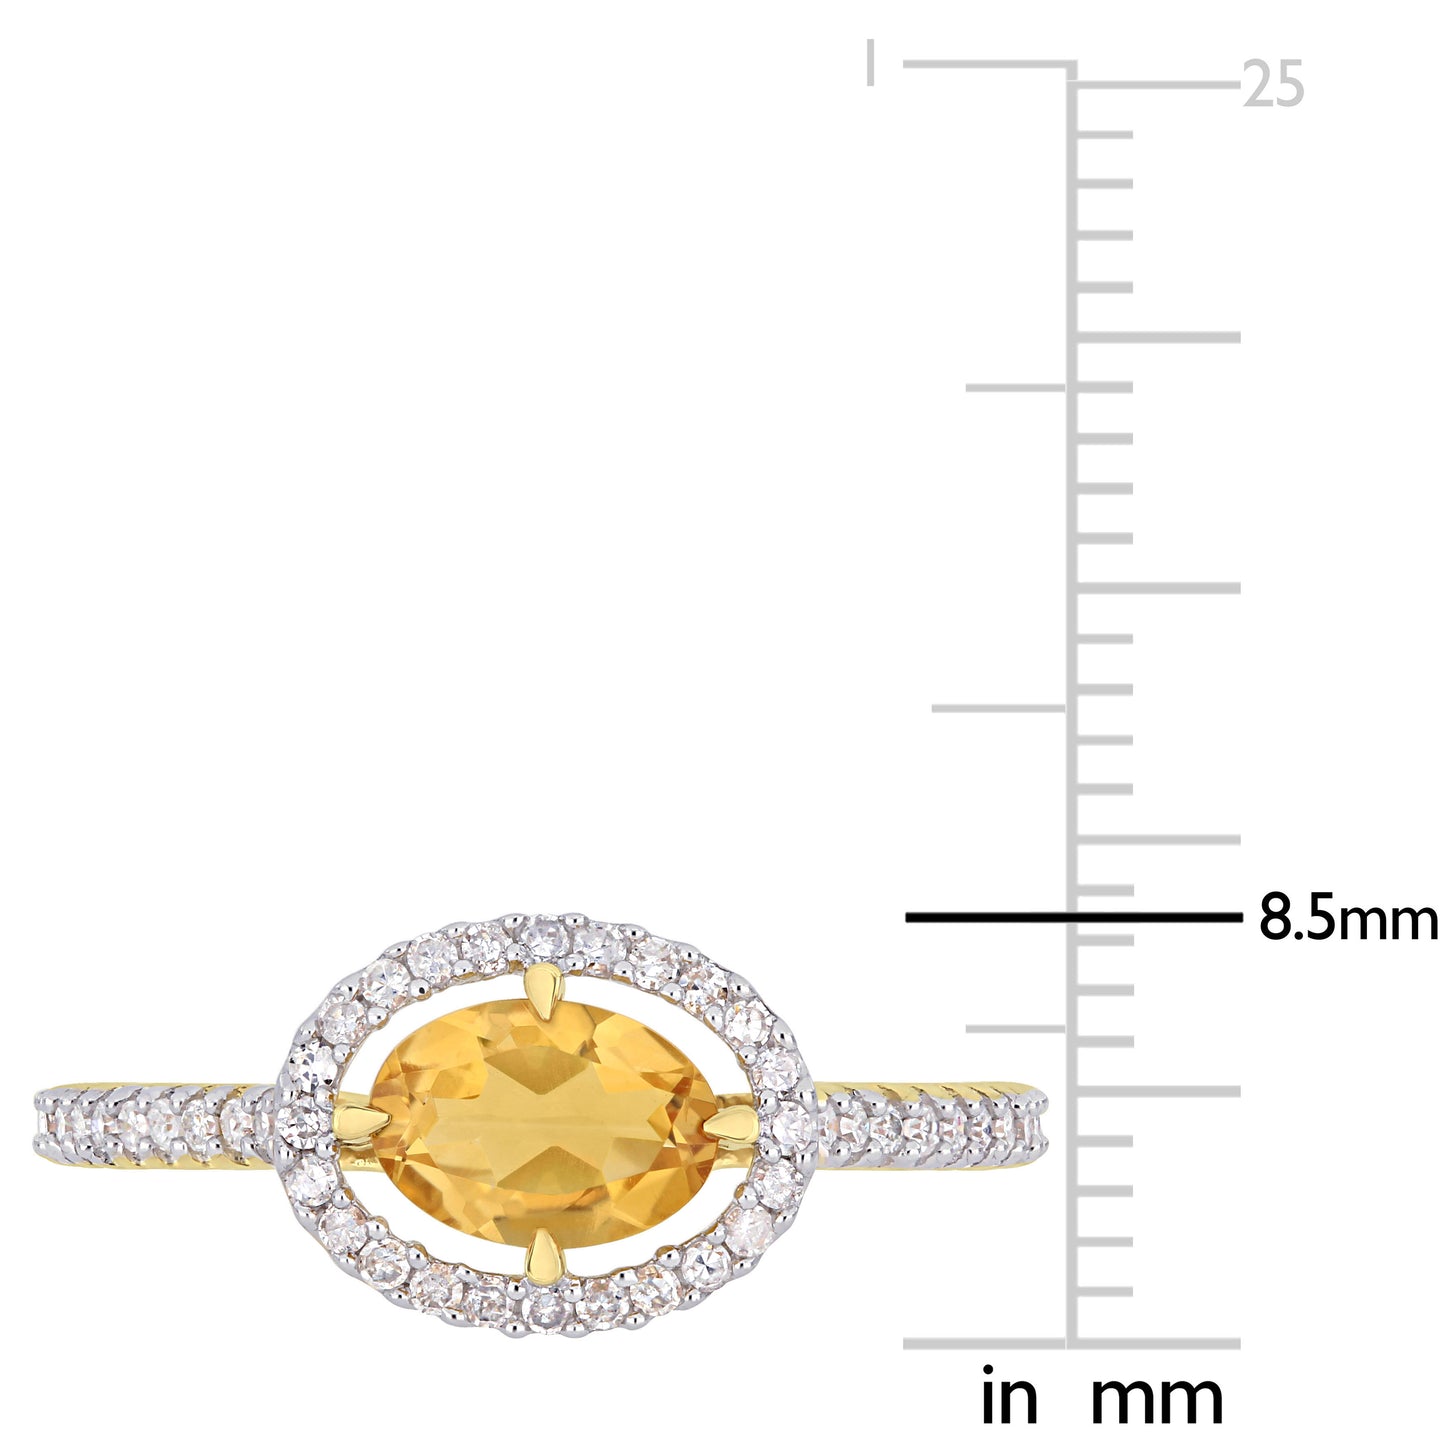 East West Floating Citrine & Diamond Halo Ring in 10k Yellow Gold